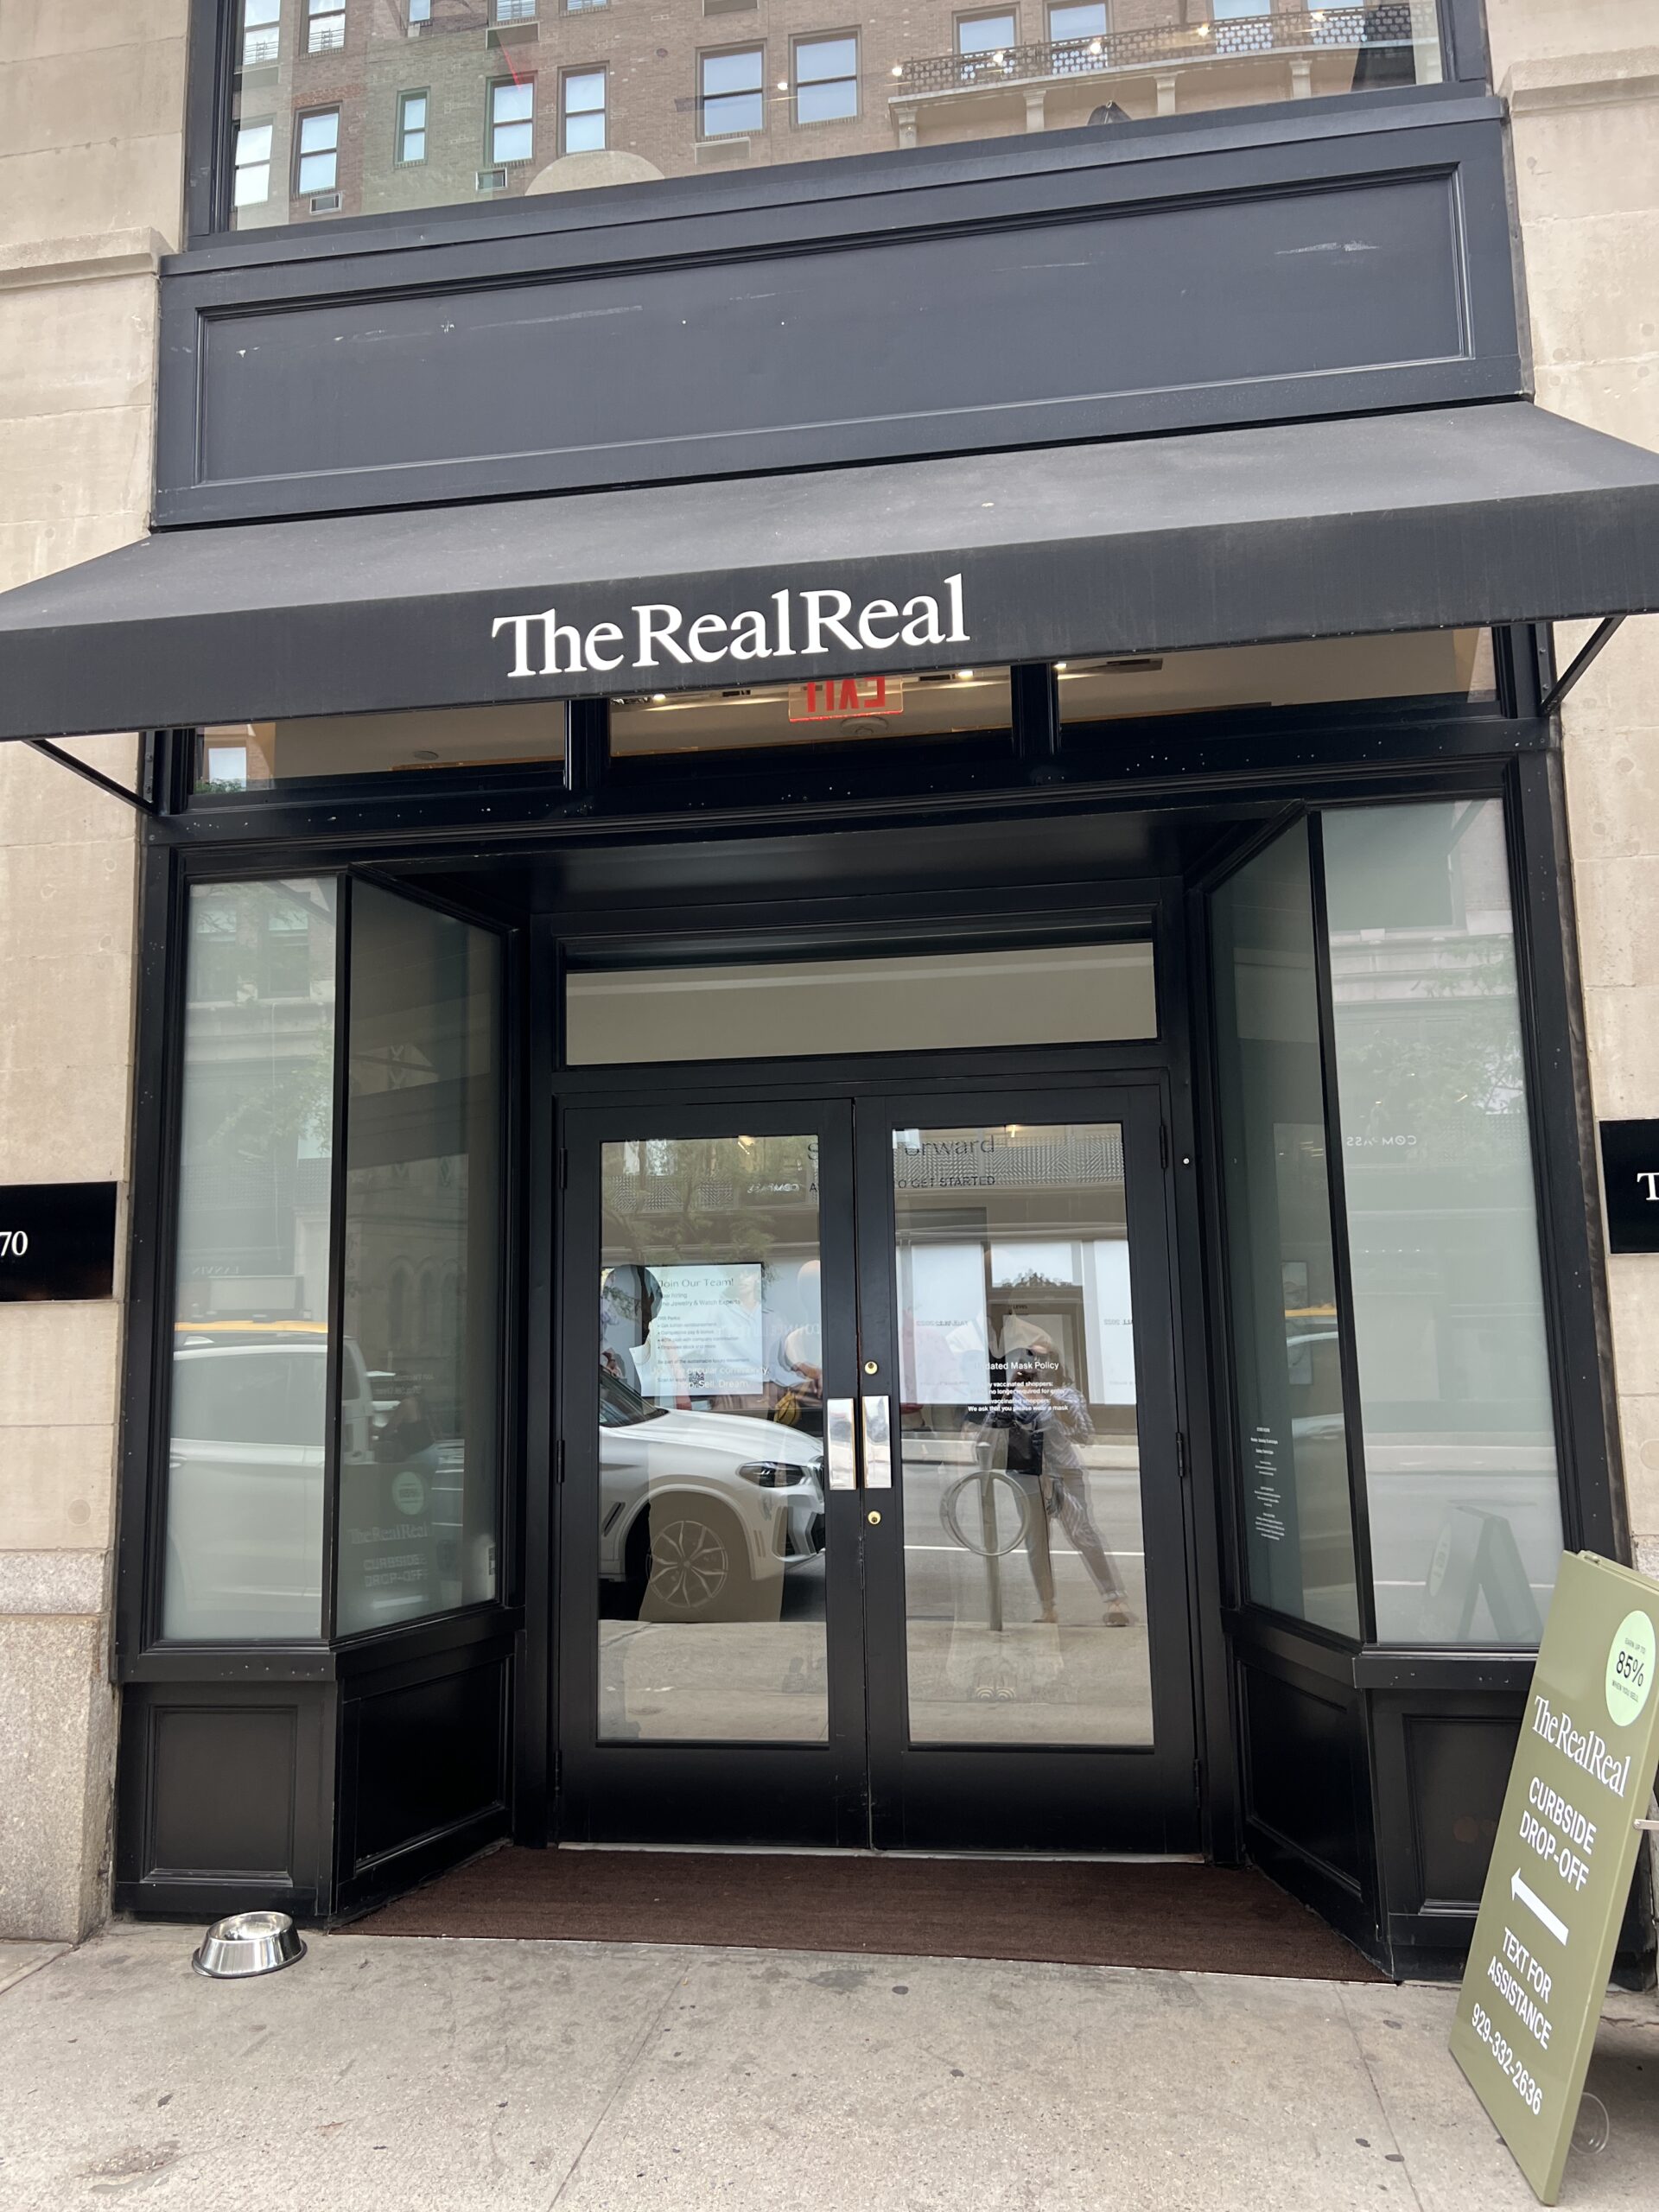 My NYC weekend experience includes a stop at The Real Real on the Upper East side of Manhattan.